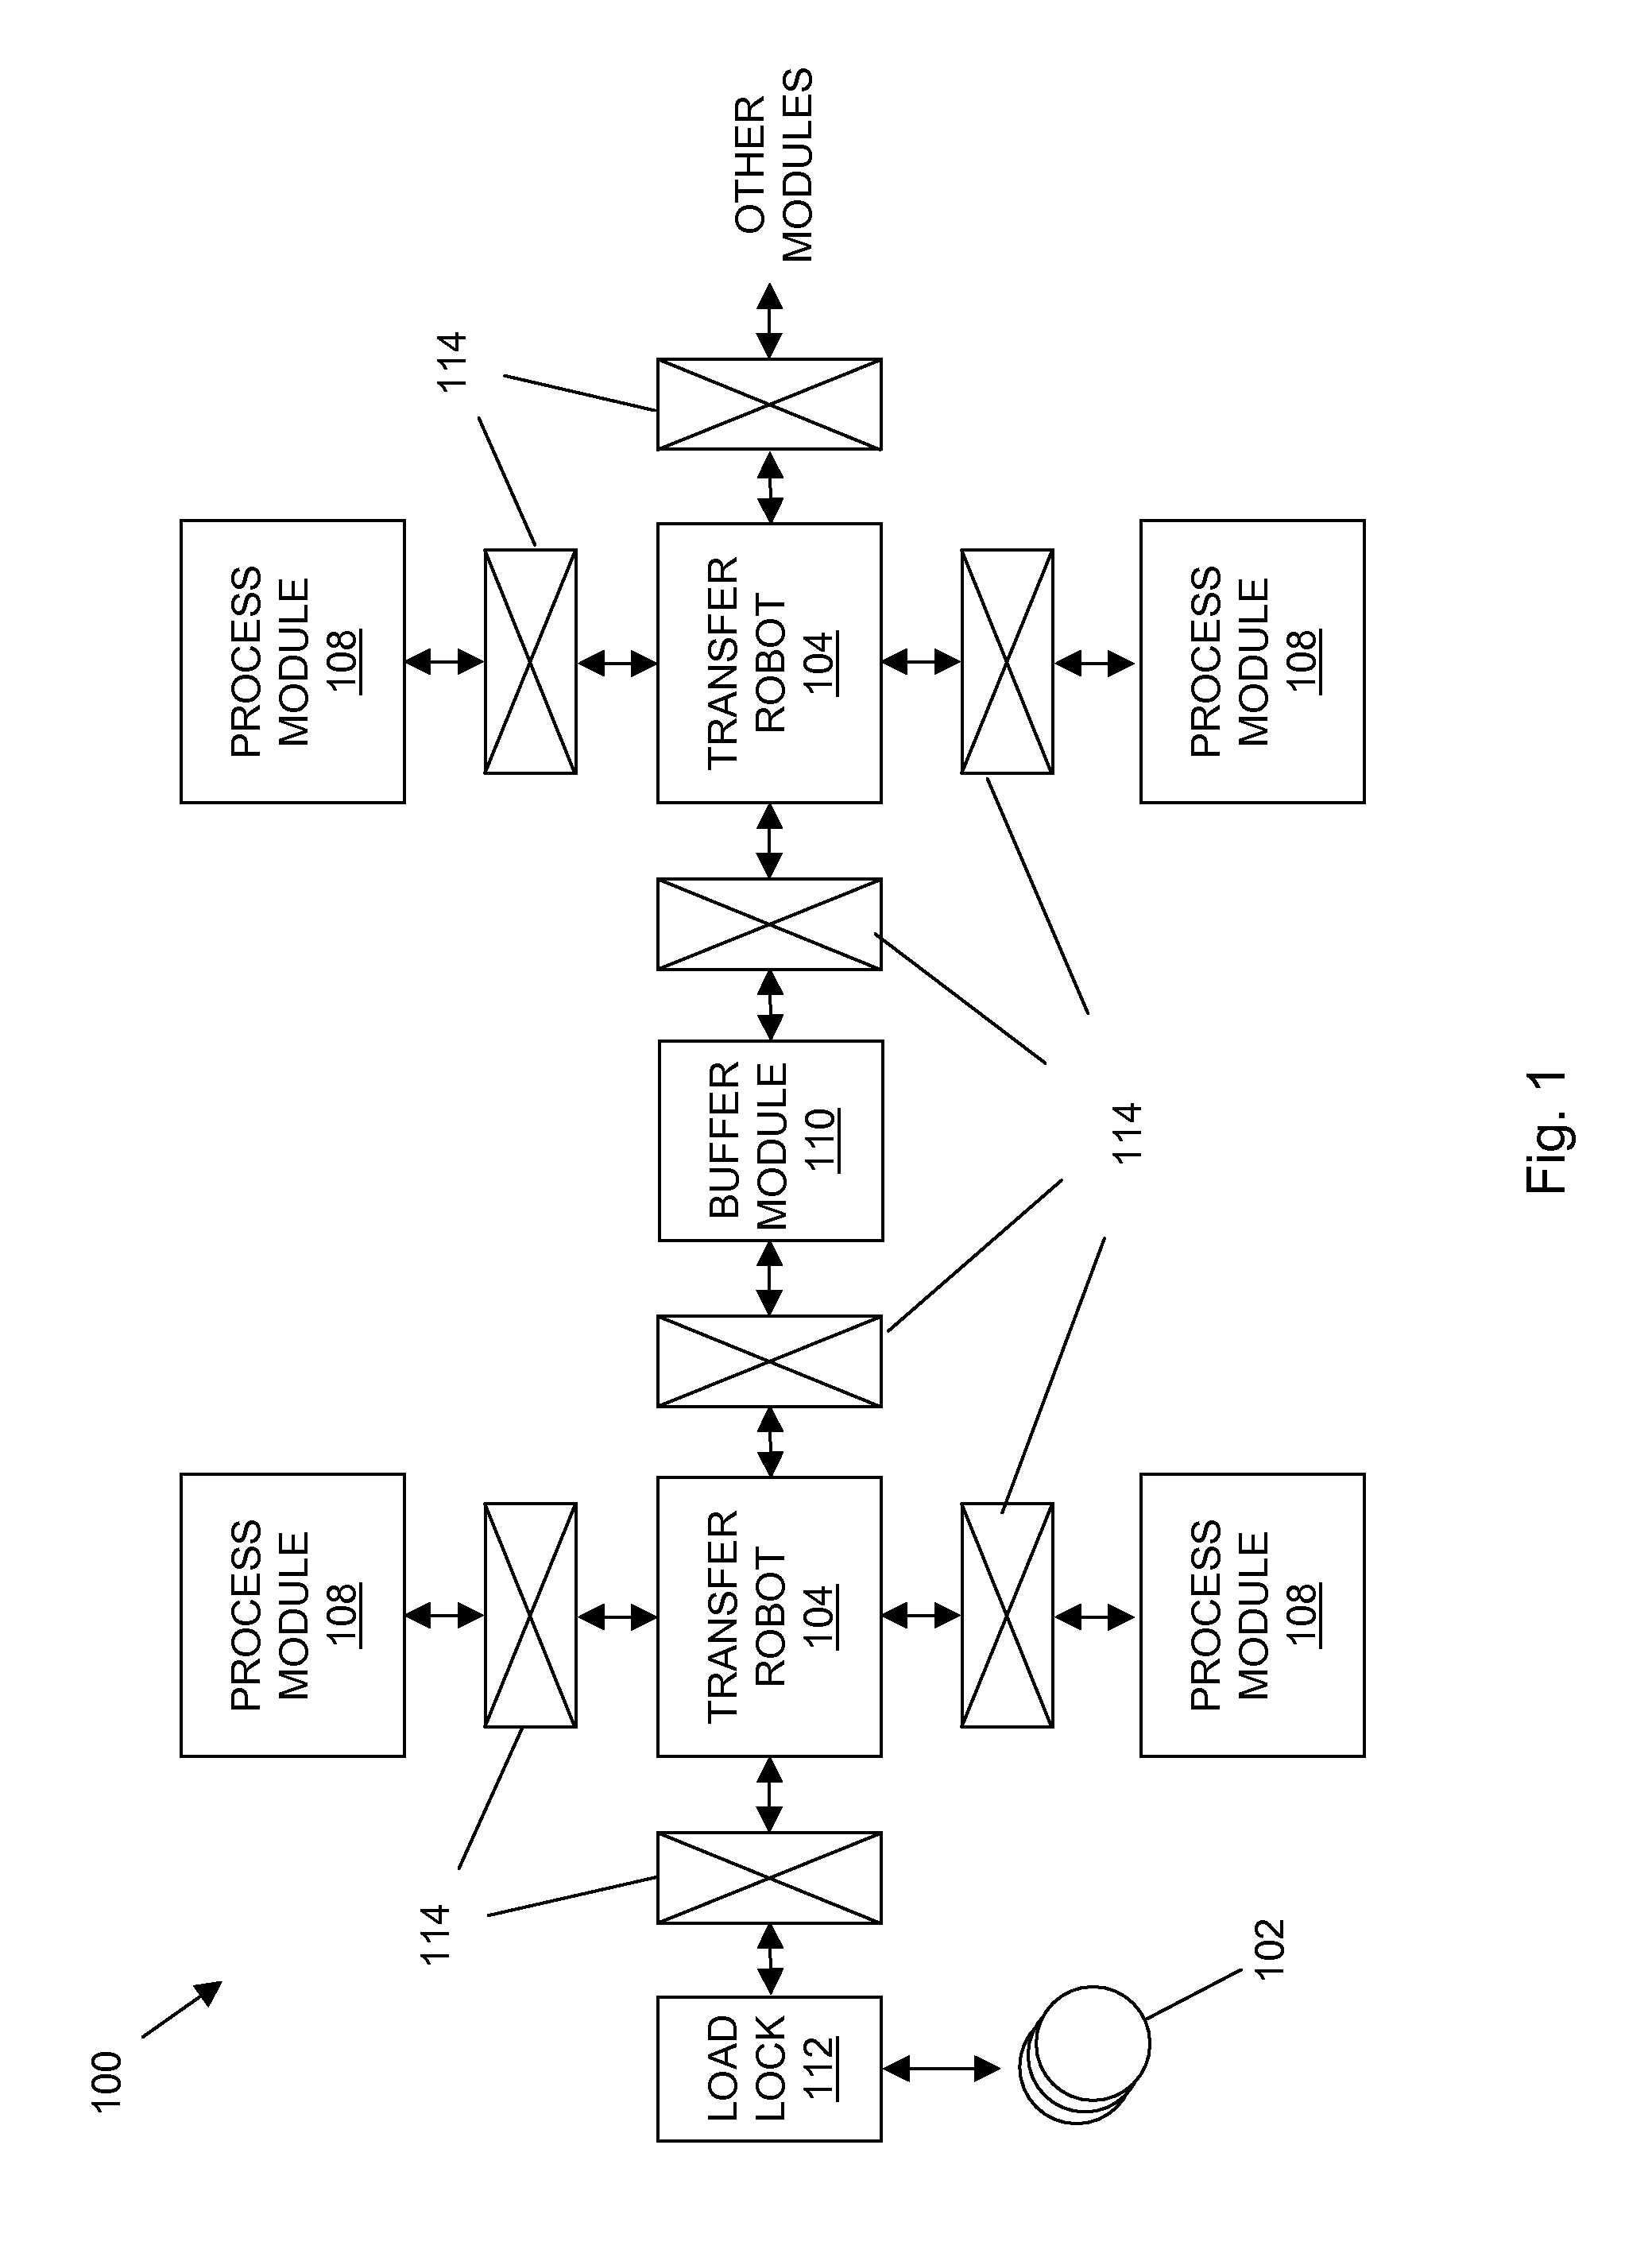 Semiconductor manufacturing process modules